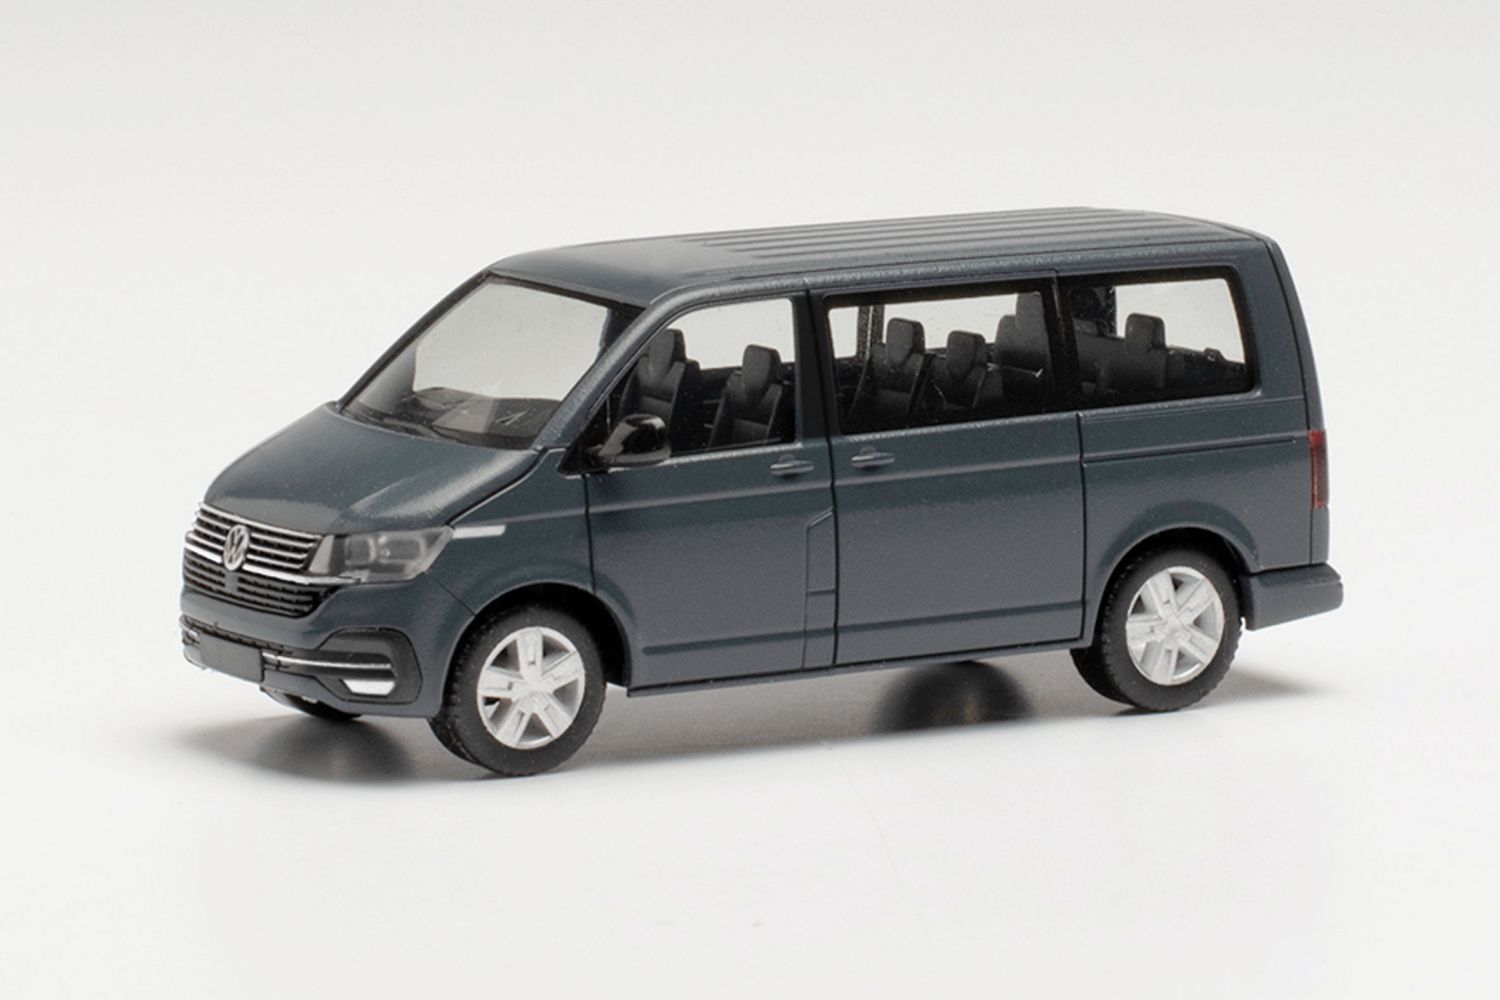 Herpa 096782 - VW T 6.1 Caravelle, pure grey